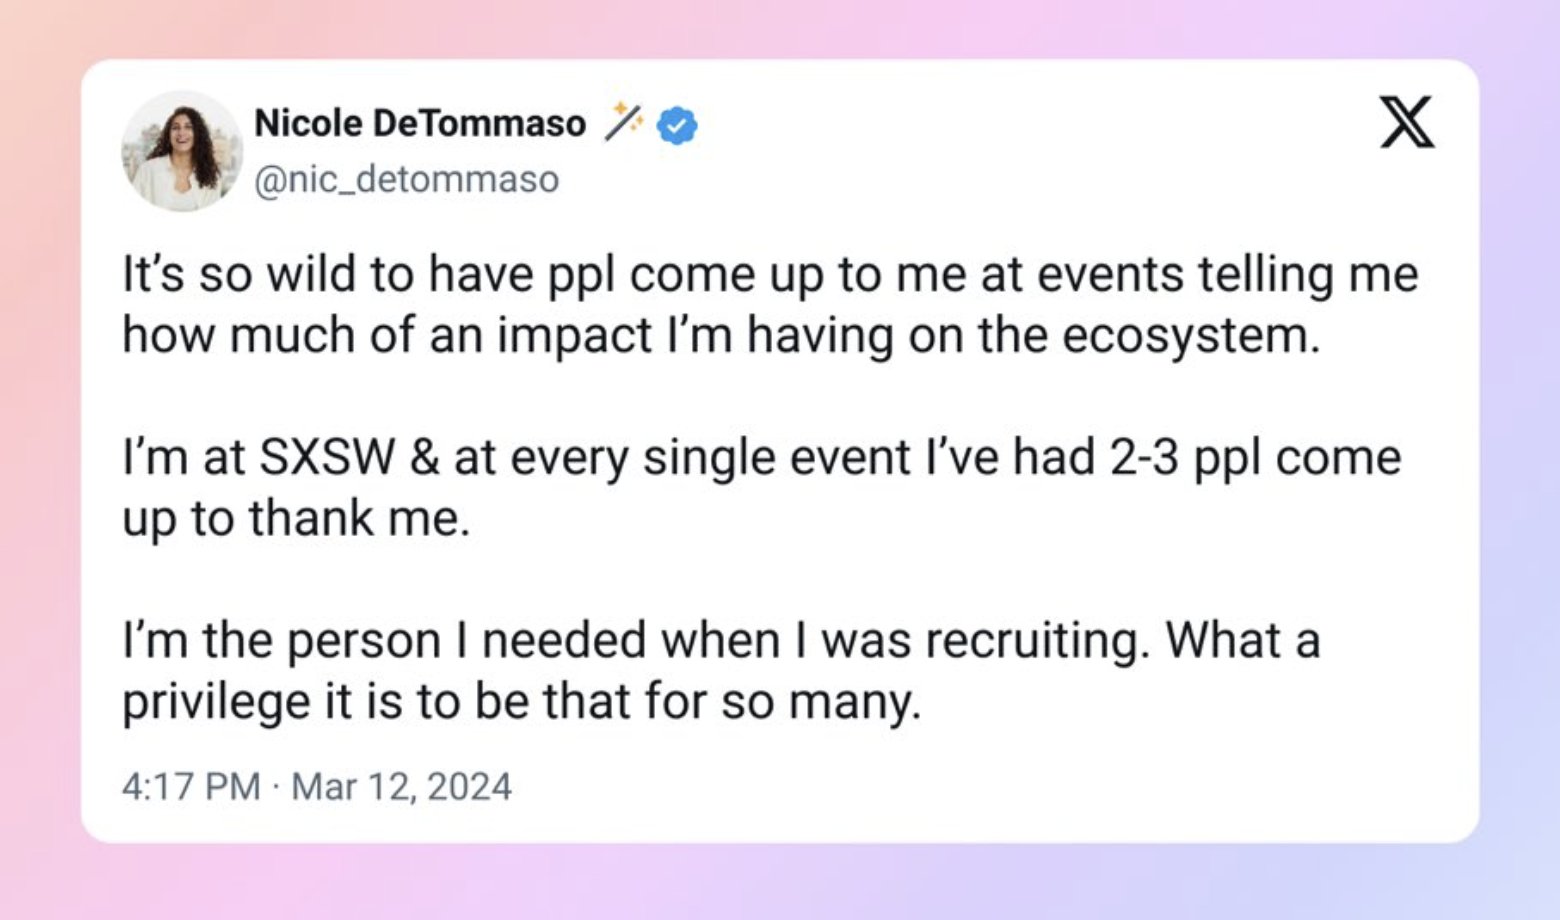 screenshot - Nicole DeTommaso X It's so wild to have ppl come up to me at events telling me how much of an impact I'm having on the ecosystem. I'm at Sxsw & at every single event I've had 23 ppl come up to thank me. I'm the person I needed when I was recr